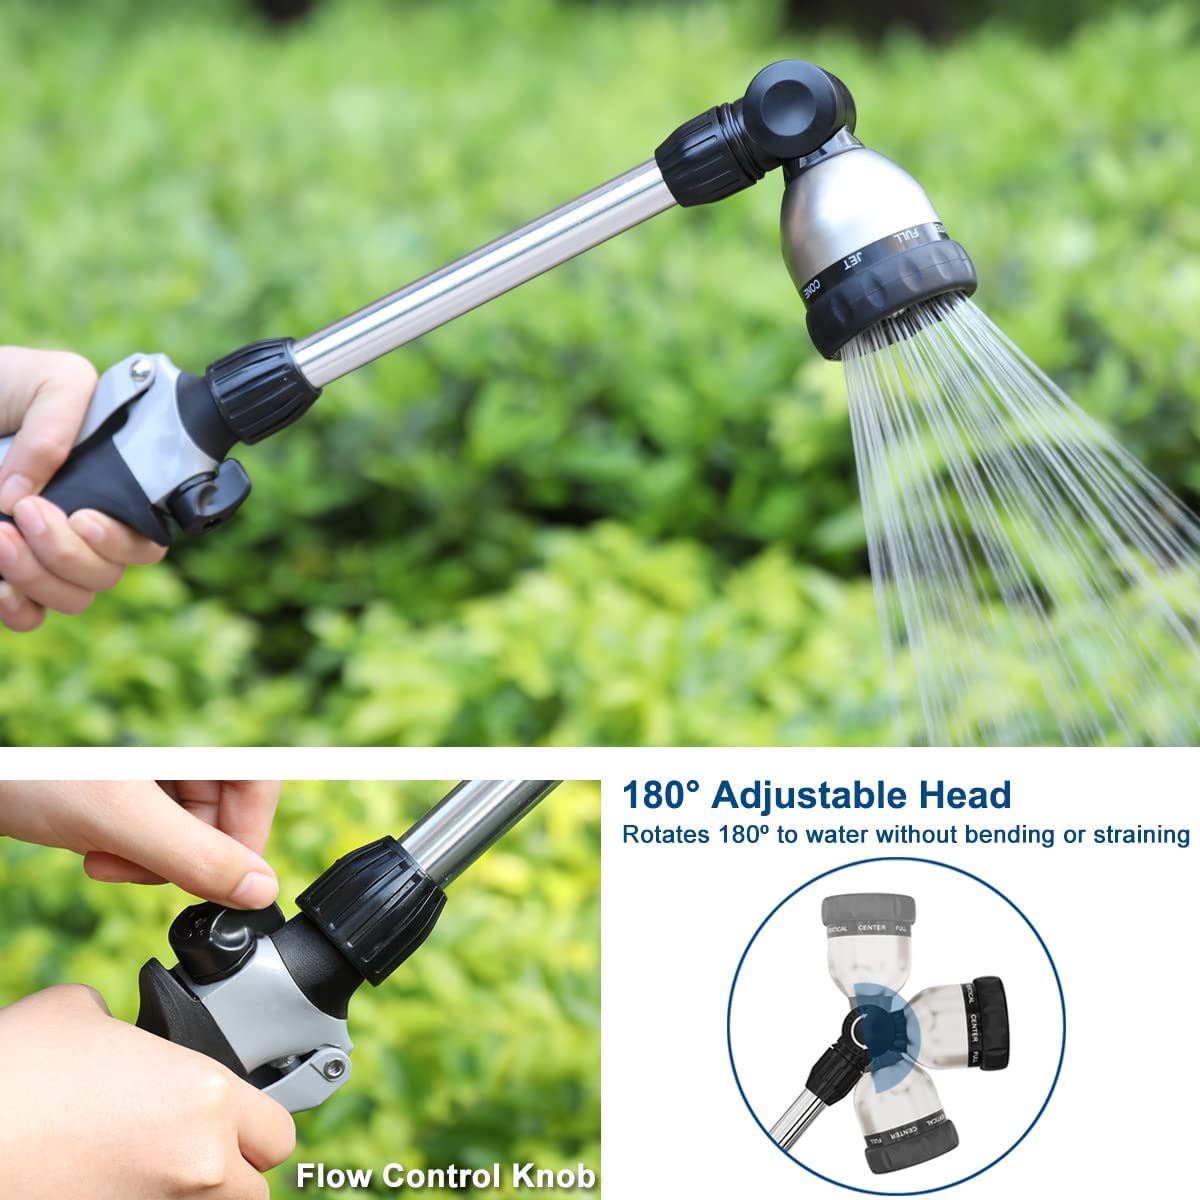 FANHAO Watering Wand Heavy Duty,16 Inches Metal Garden Hose Wand with 8 Spray Patterns